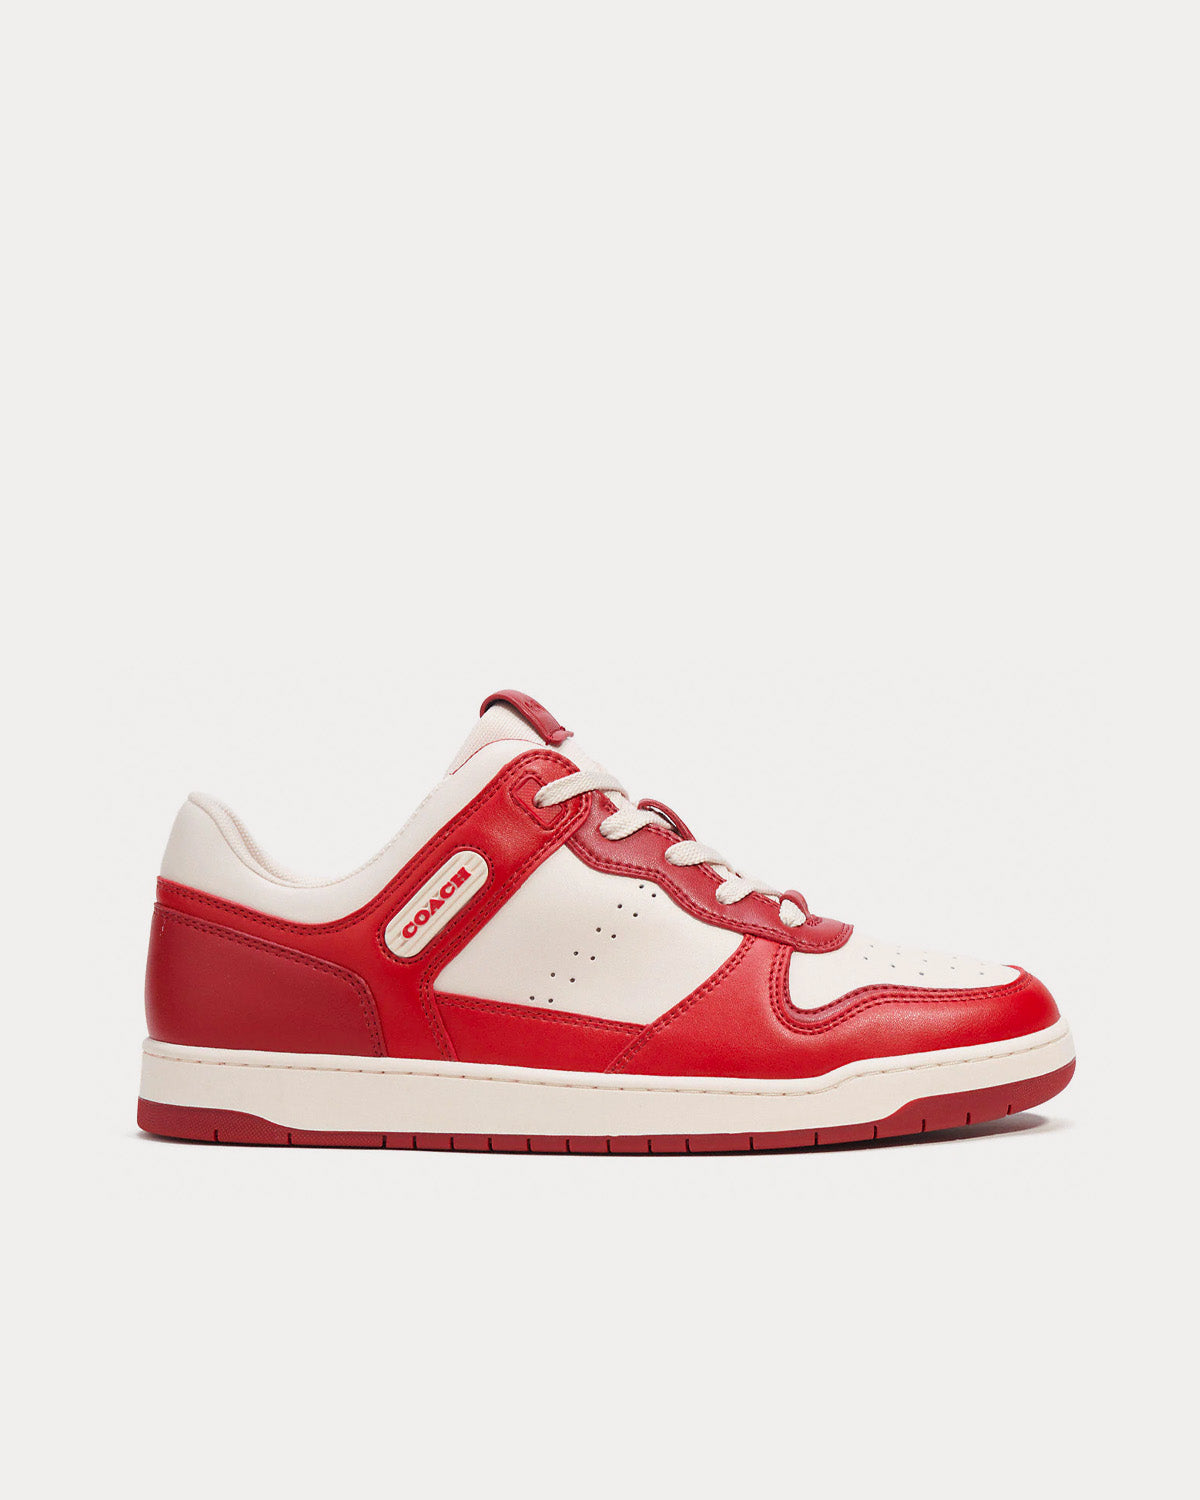 blod amme Dyster Coach C201 Sport Red Low Top Sneakers - Sneak in Peace